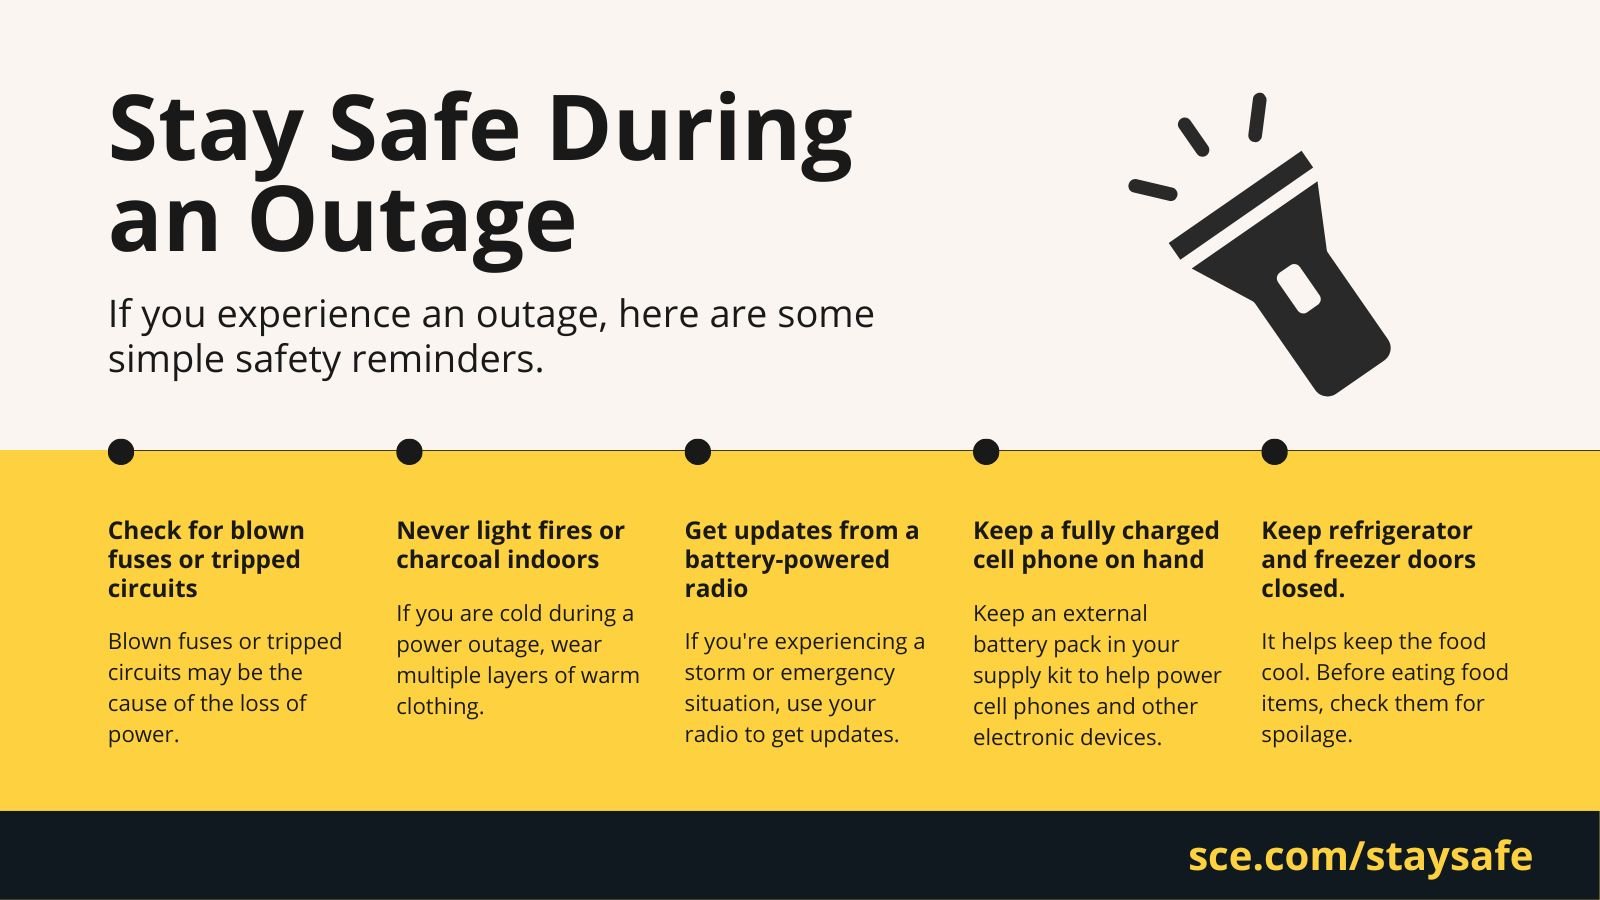 safety in outage.jpg